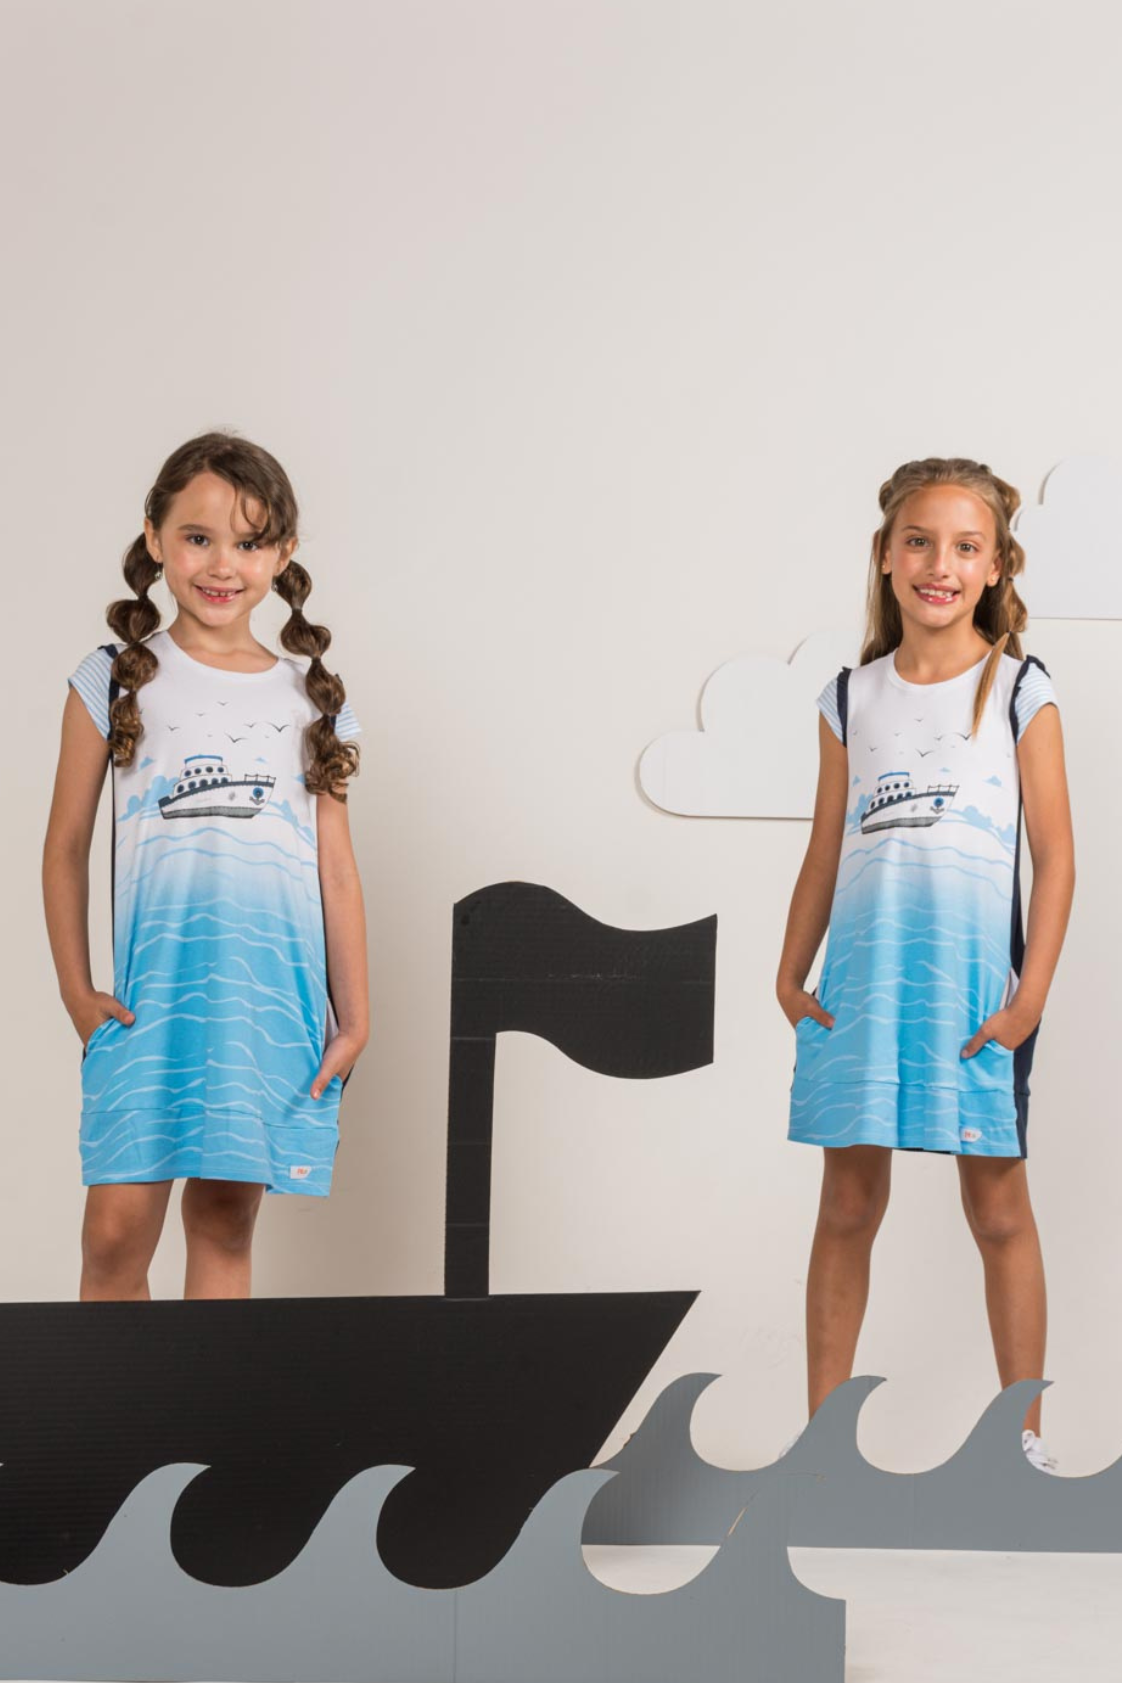 Girl dress with pockets, Boat in the ocean. Made in Sustainable material, children clothes. Eco-friendly fashion for kids - Prisma Kiddos